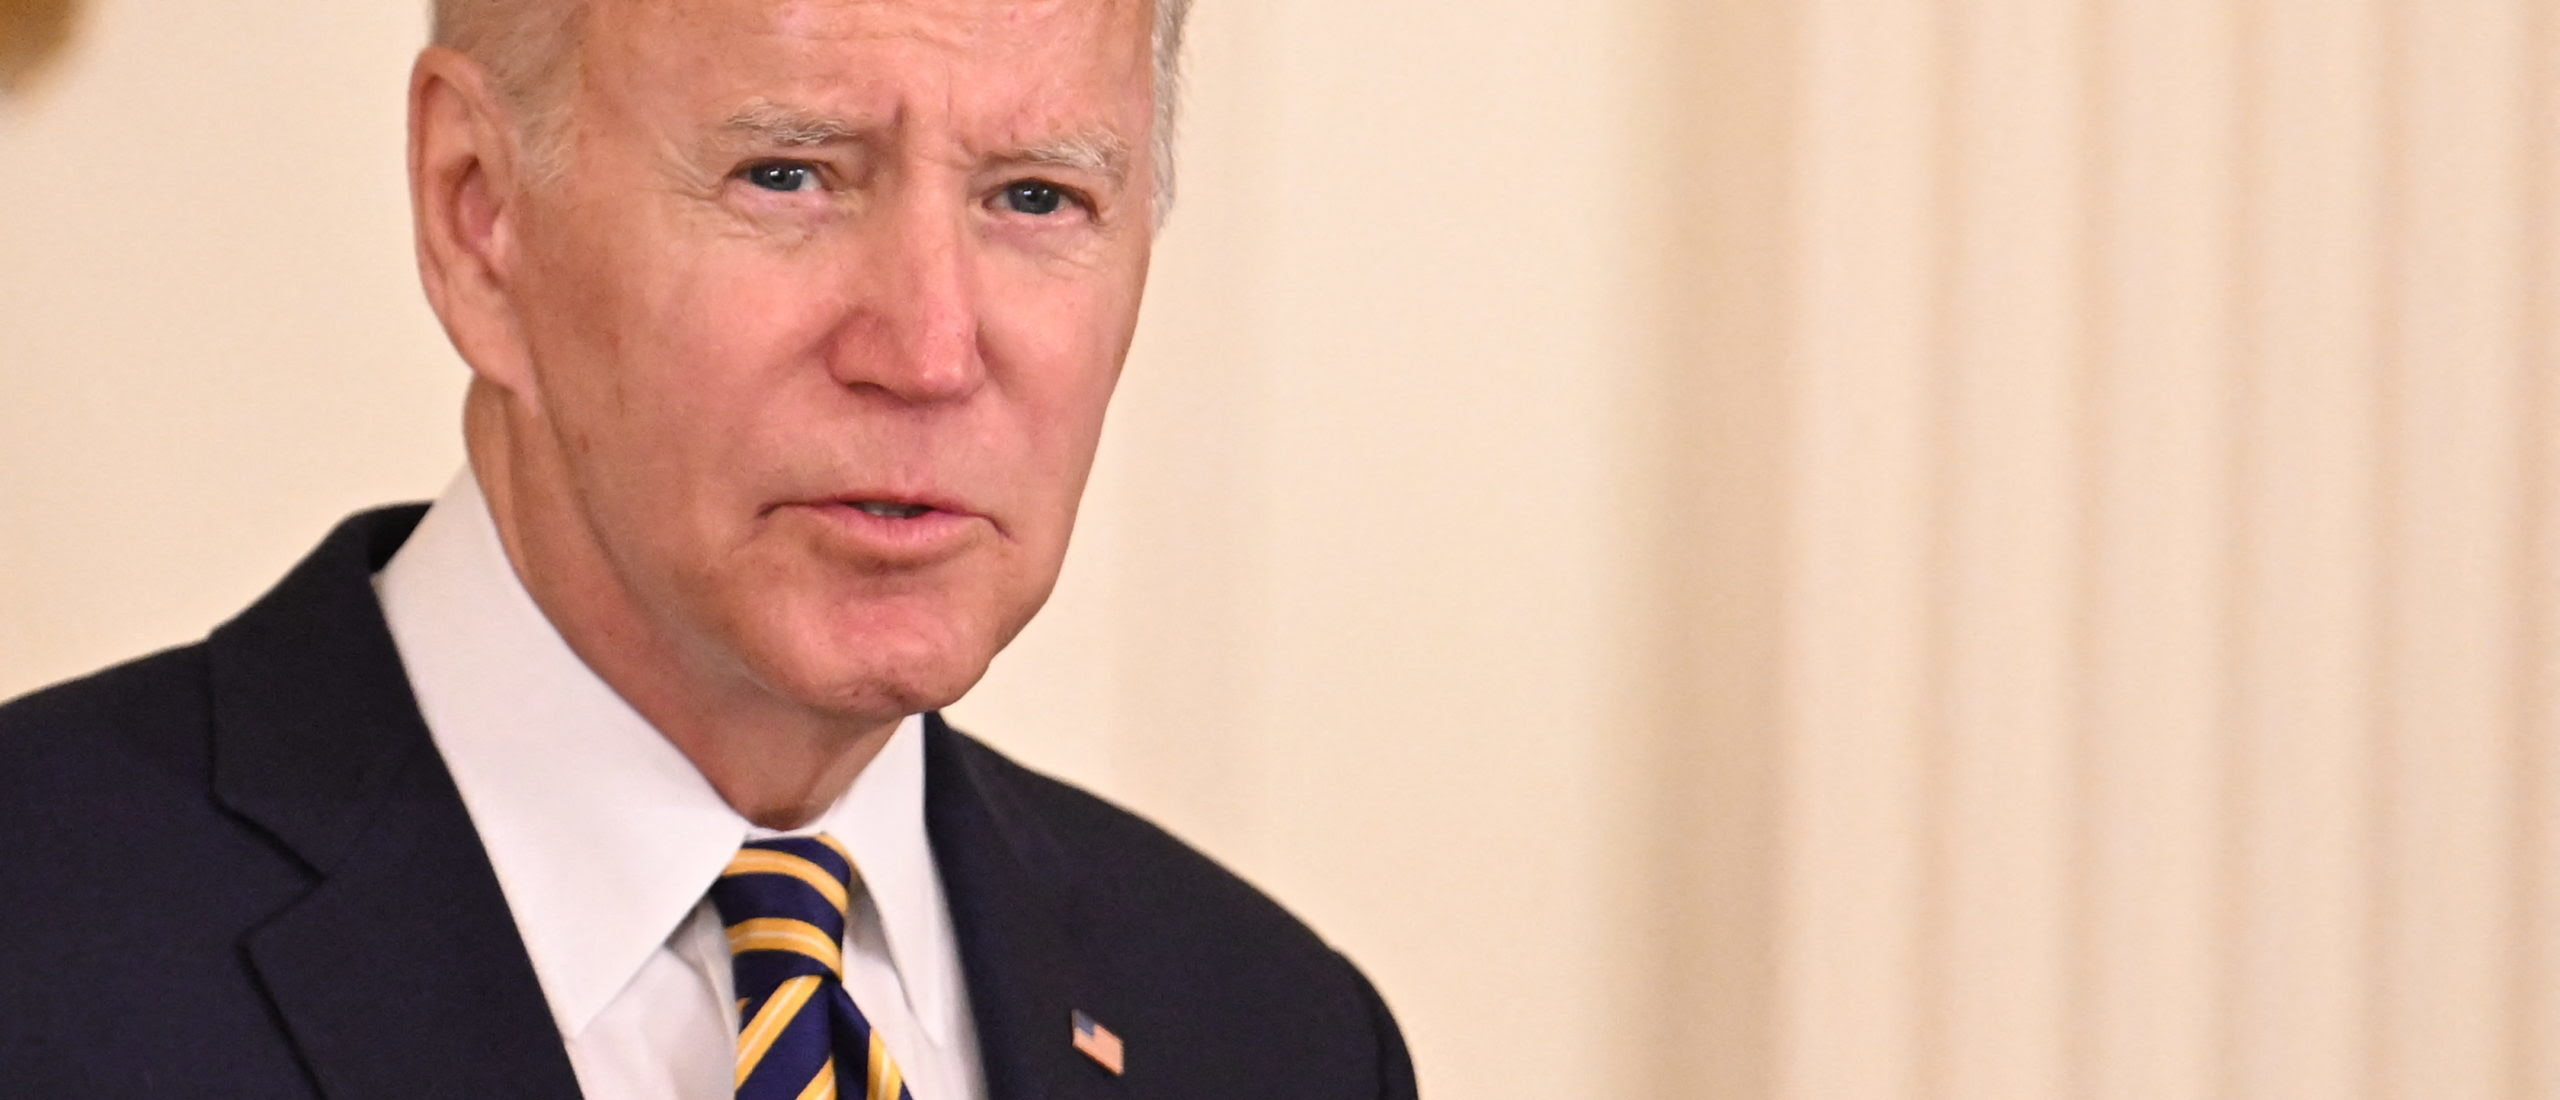 SANDERS And CARTER: Biden’s Gimmick Solutions Only Make The Energy Crisis Worse